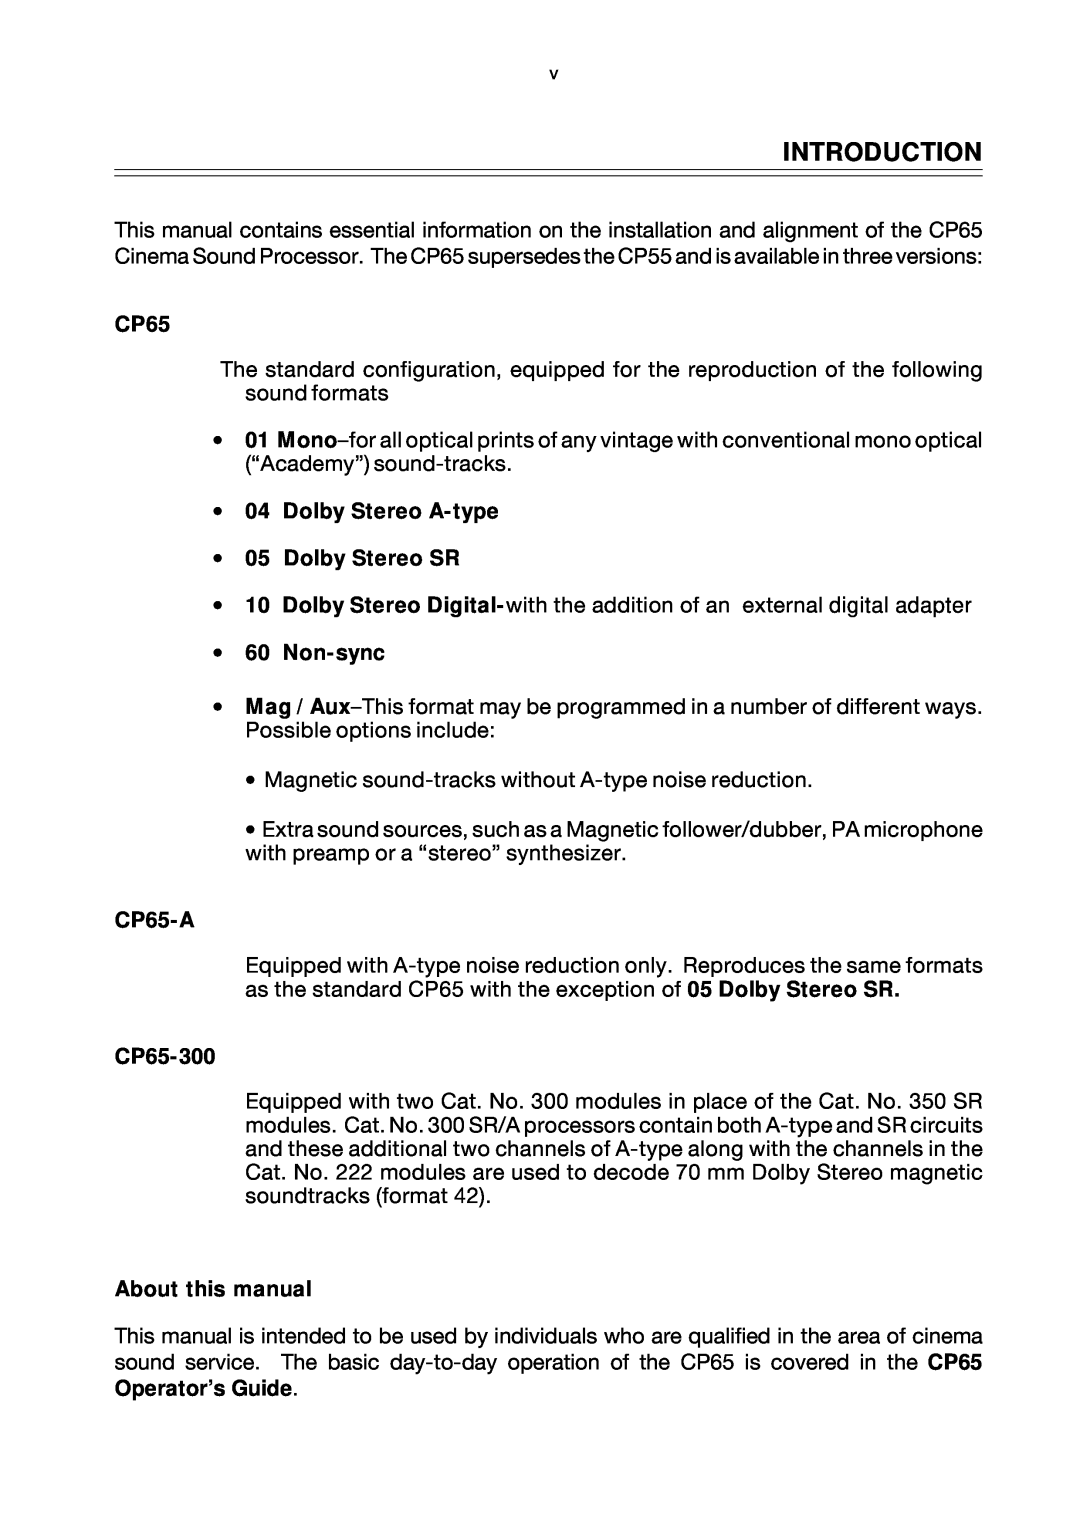 Dolby Laboratories Introduction, Dolby Stereo A-type 05 Dolby Stereo SR, Non-sync, CP65-A, CP65-300, About this manual 